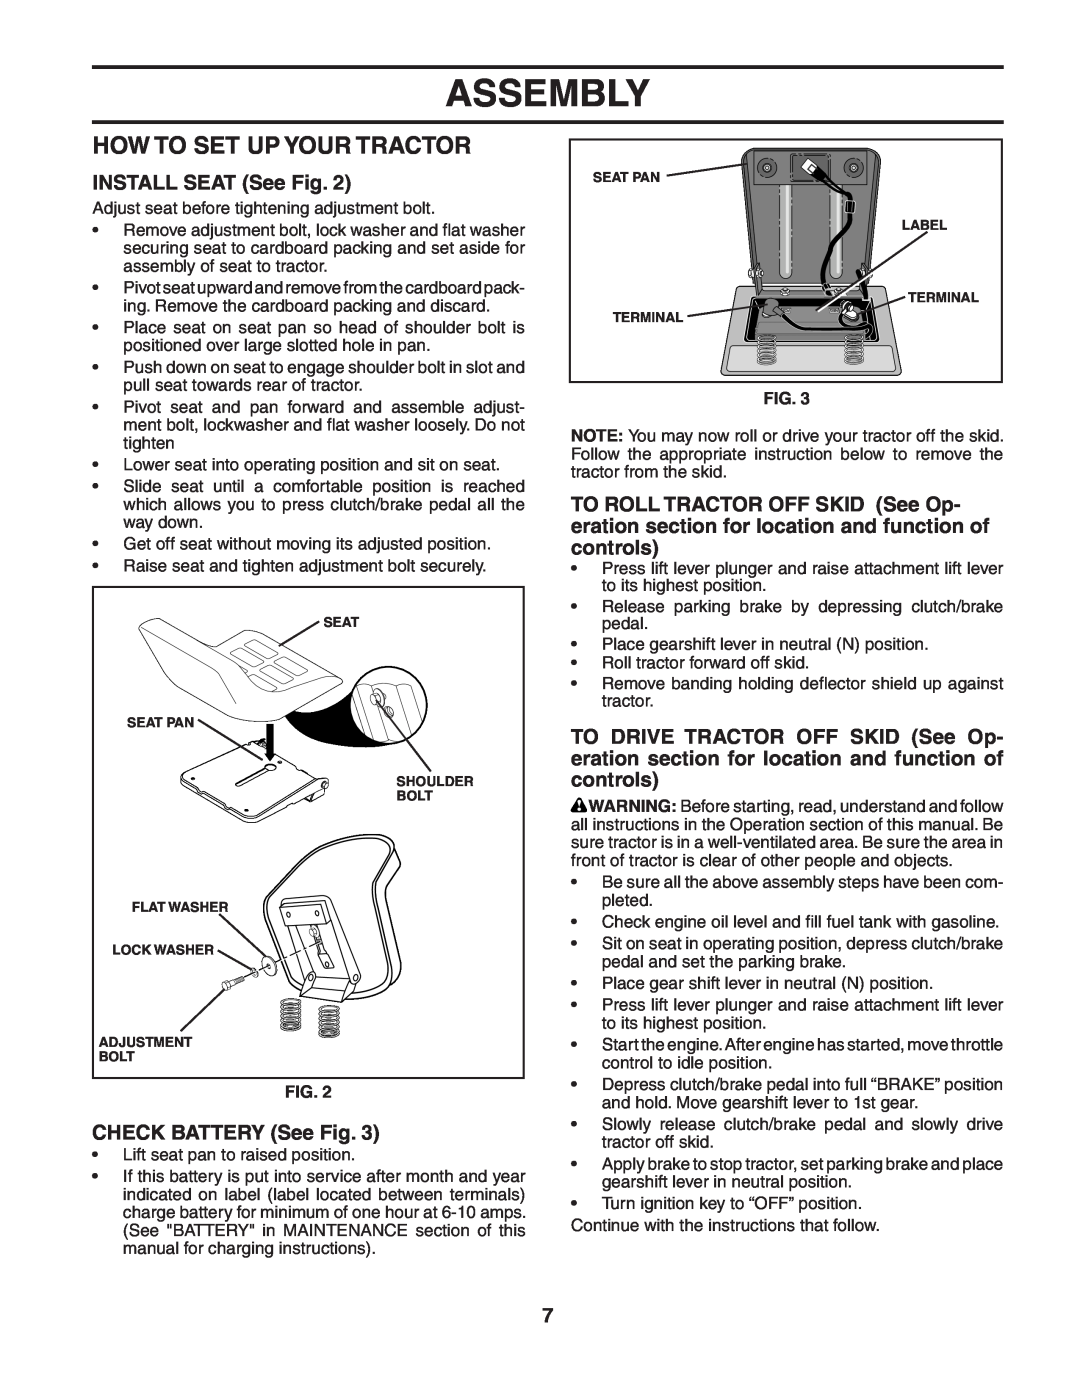 Weed Eater WET2242STA manual How To Set Up Your Tractor, INSTALL SEAT See Fig, CHECK BATTERY See Fig, Assembly 